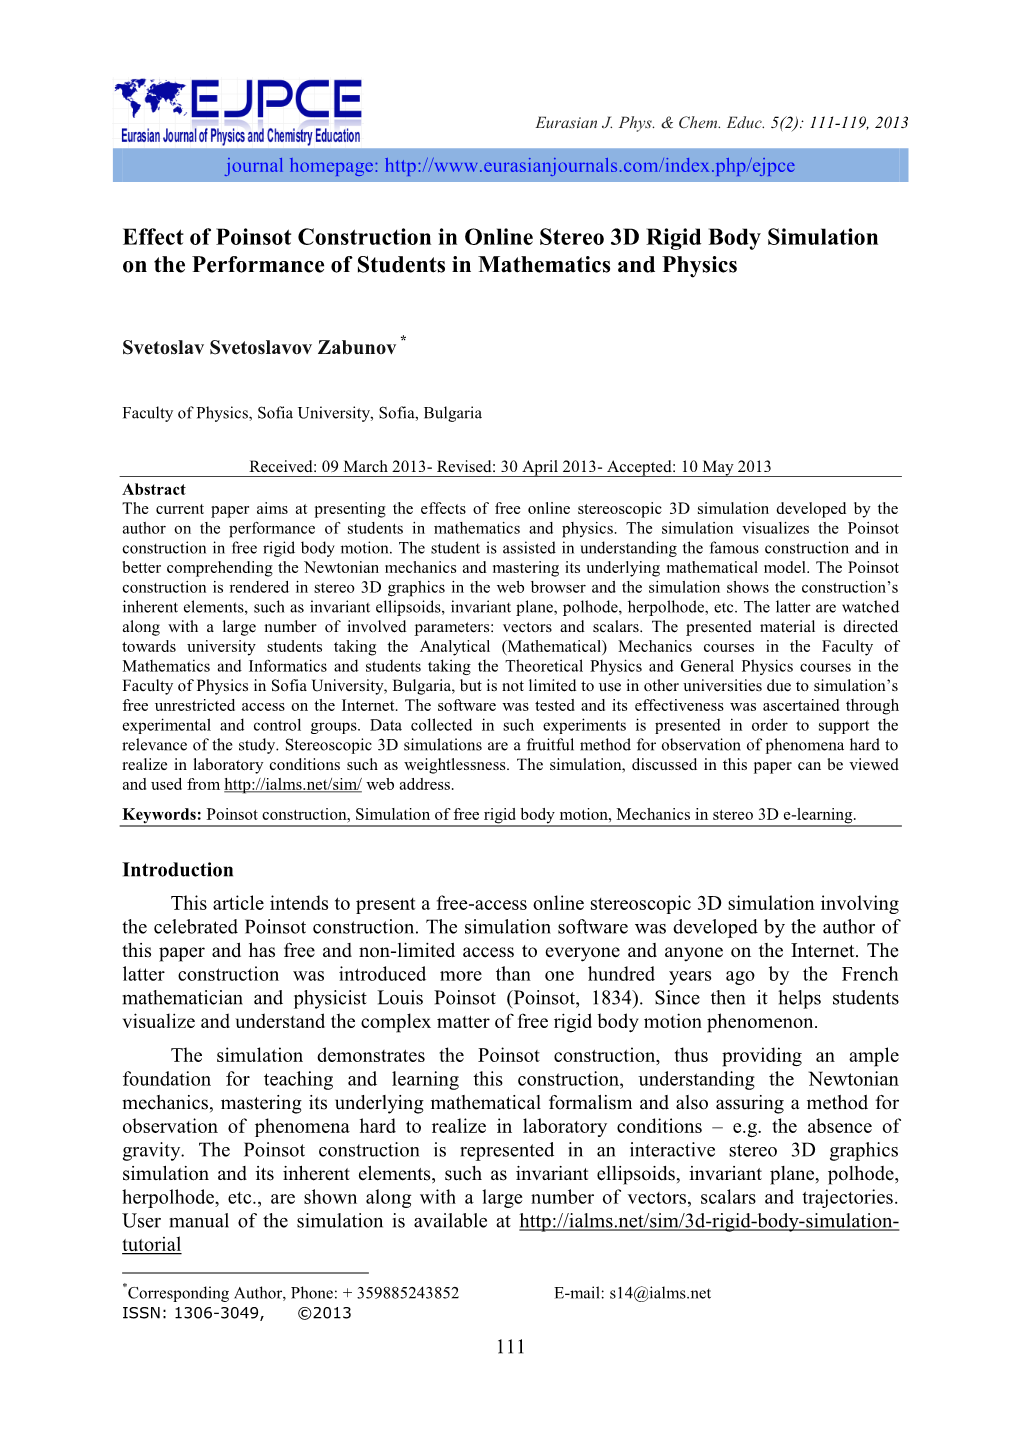 Effect of Poinsot Construction in Online Stereo 3D Rigid Body Simulation on the Performance of Students in Mathematics and Physics